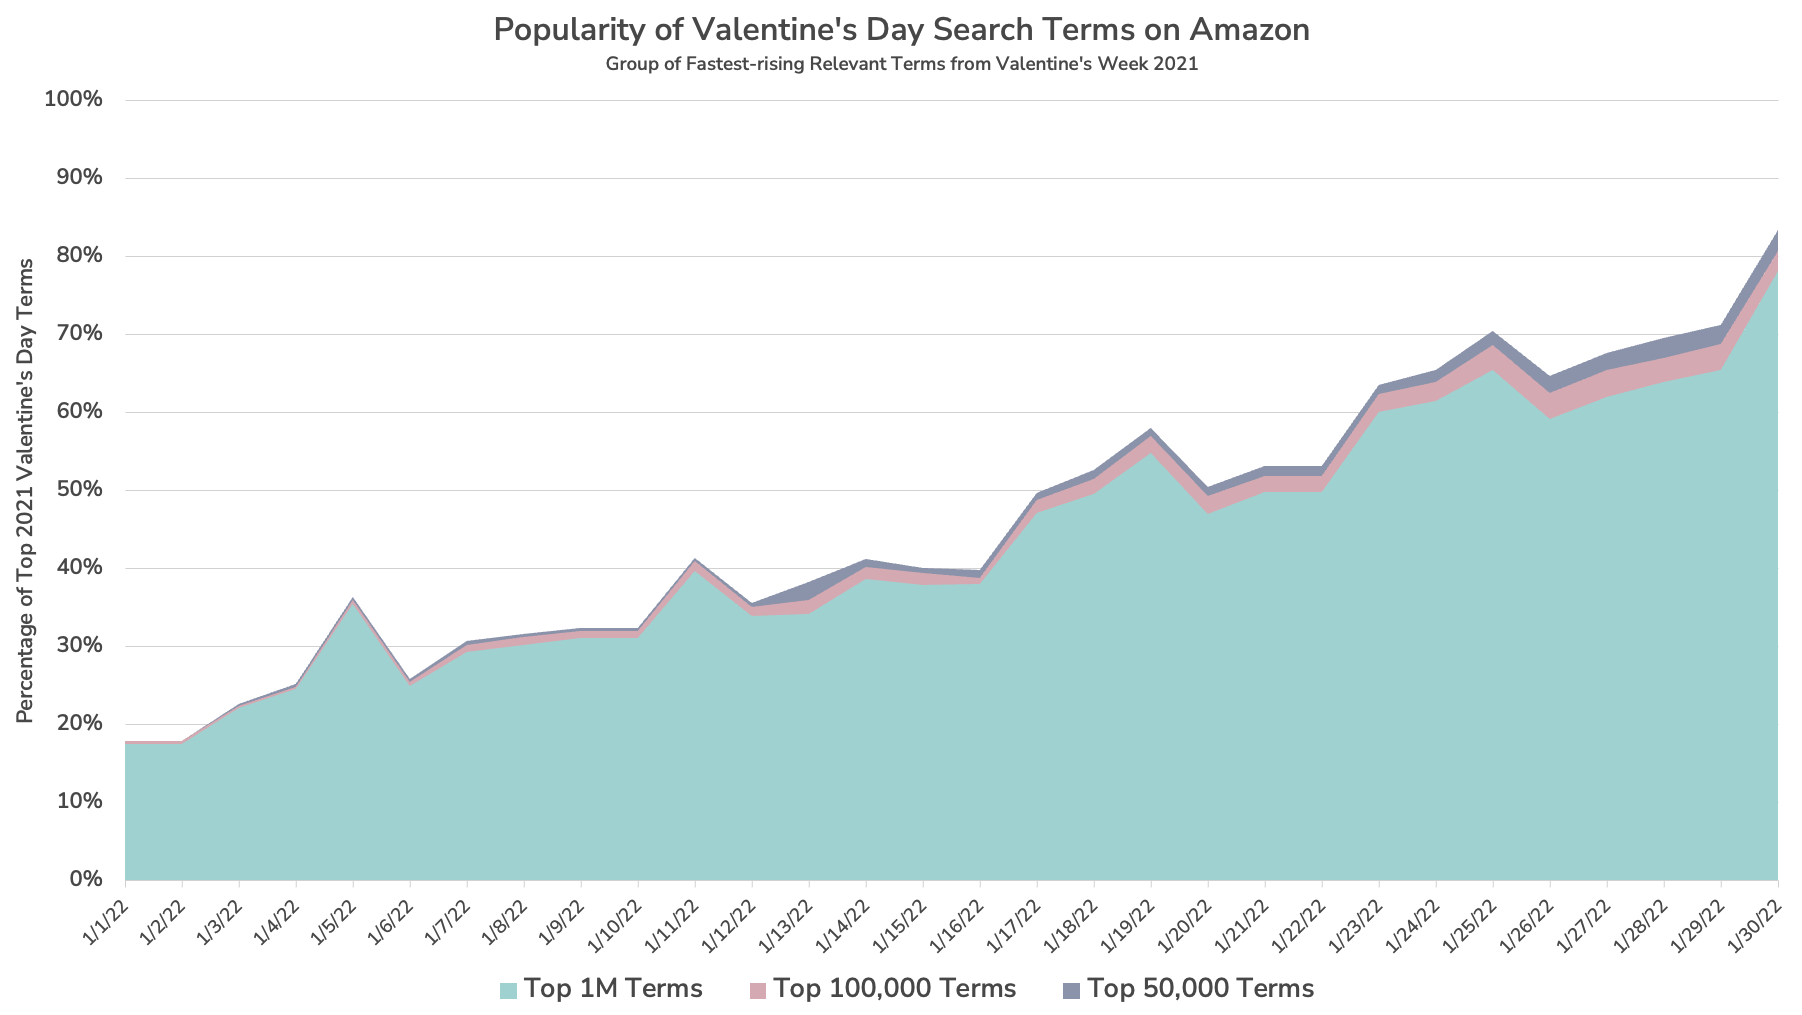 popularity of valentine's day searches on Amazon